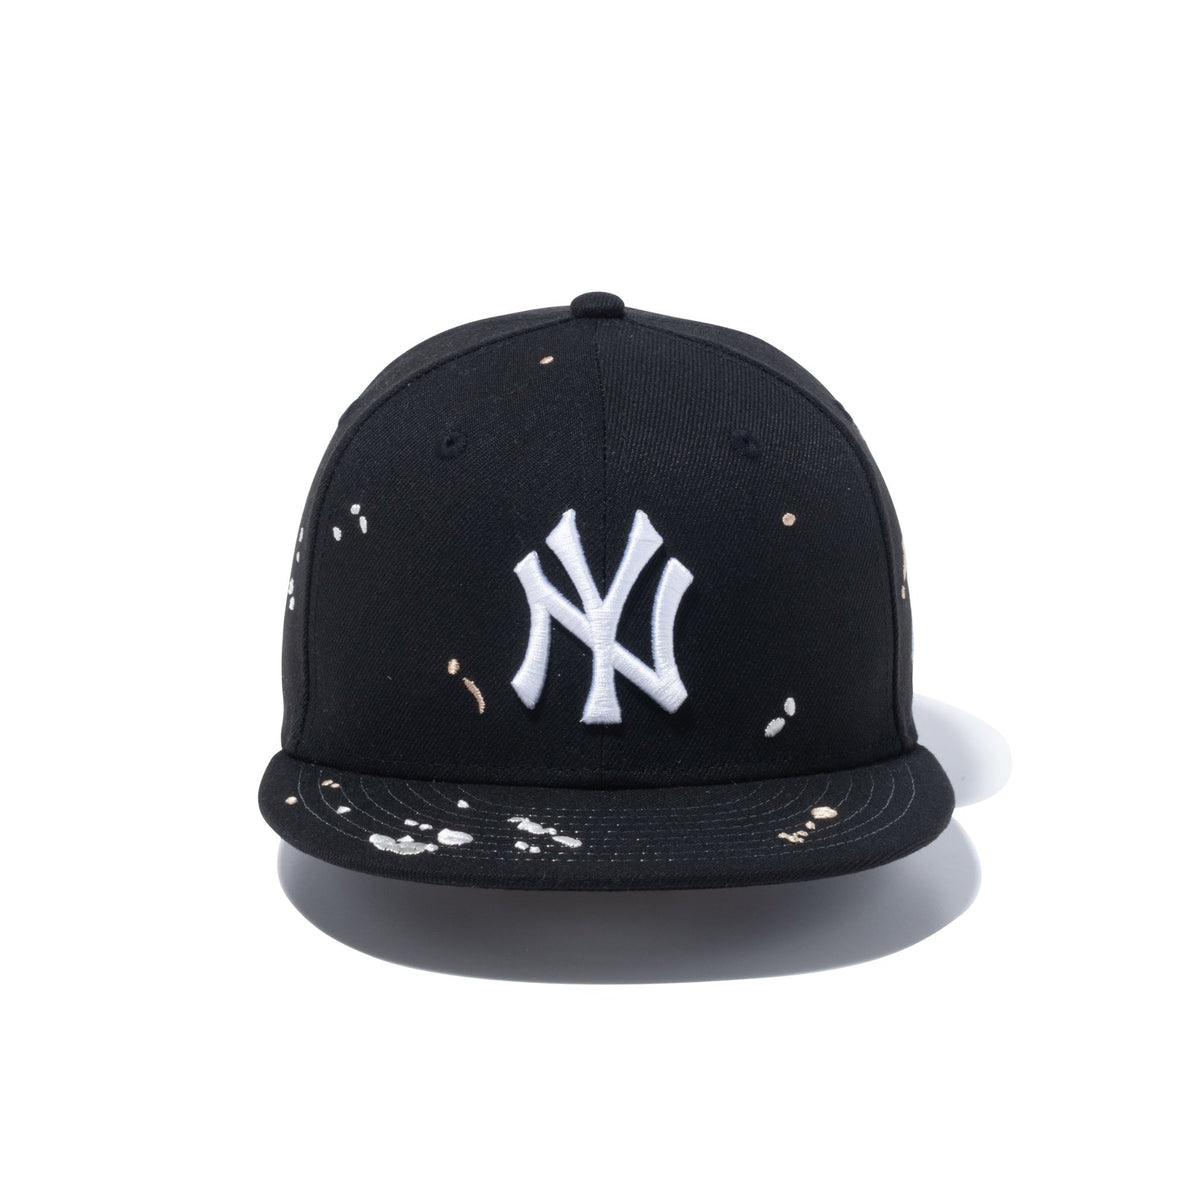 Youth 9FIFTY Splash Embroidery ニューヨーク・ヤンキース ブラック